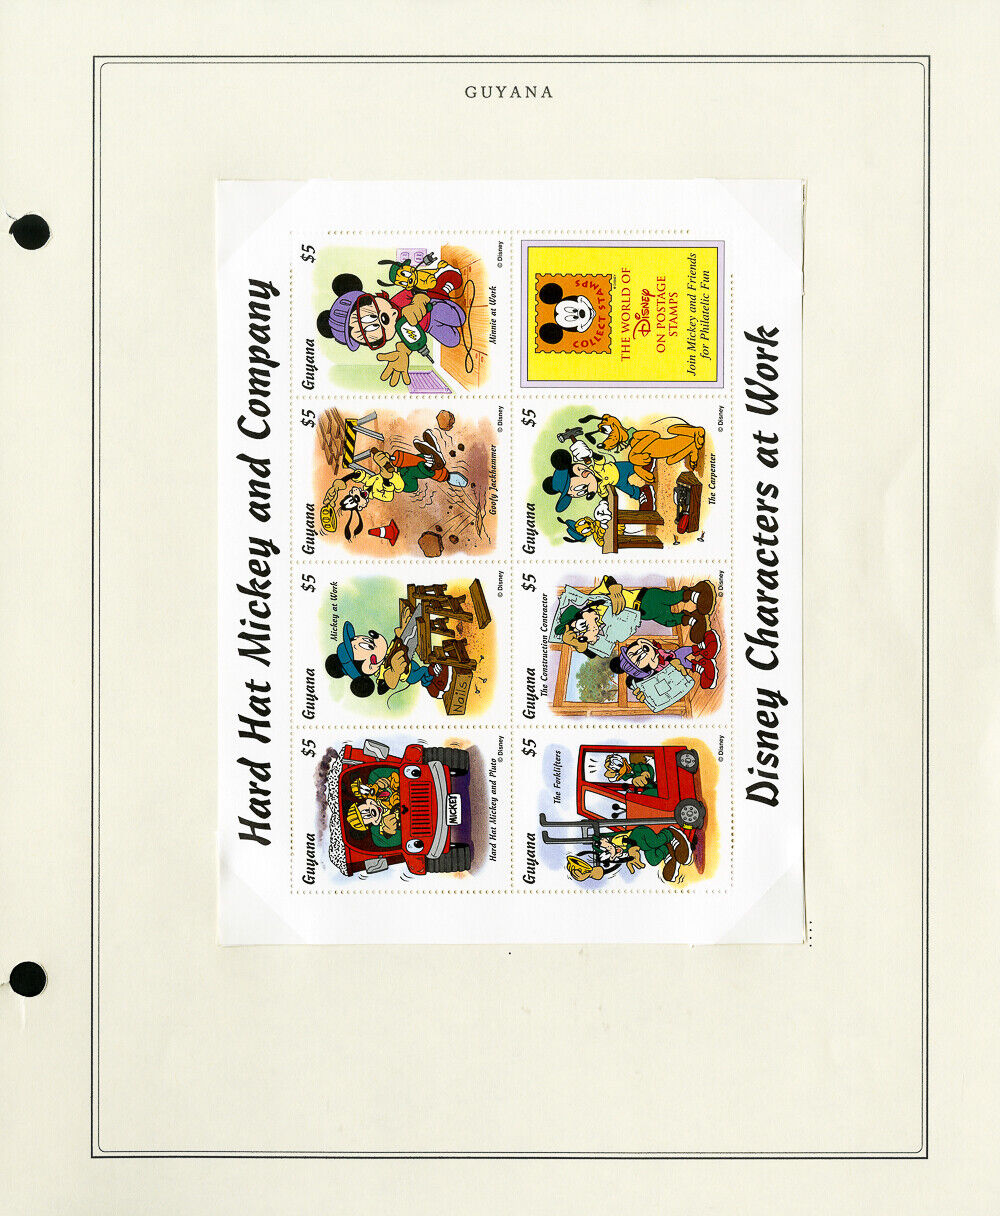 Guyana Mint Modern 1990s Stamp Collection